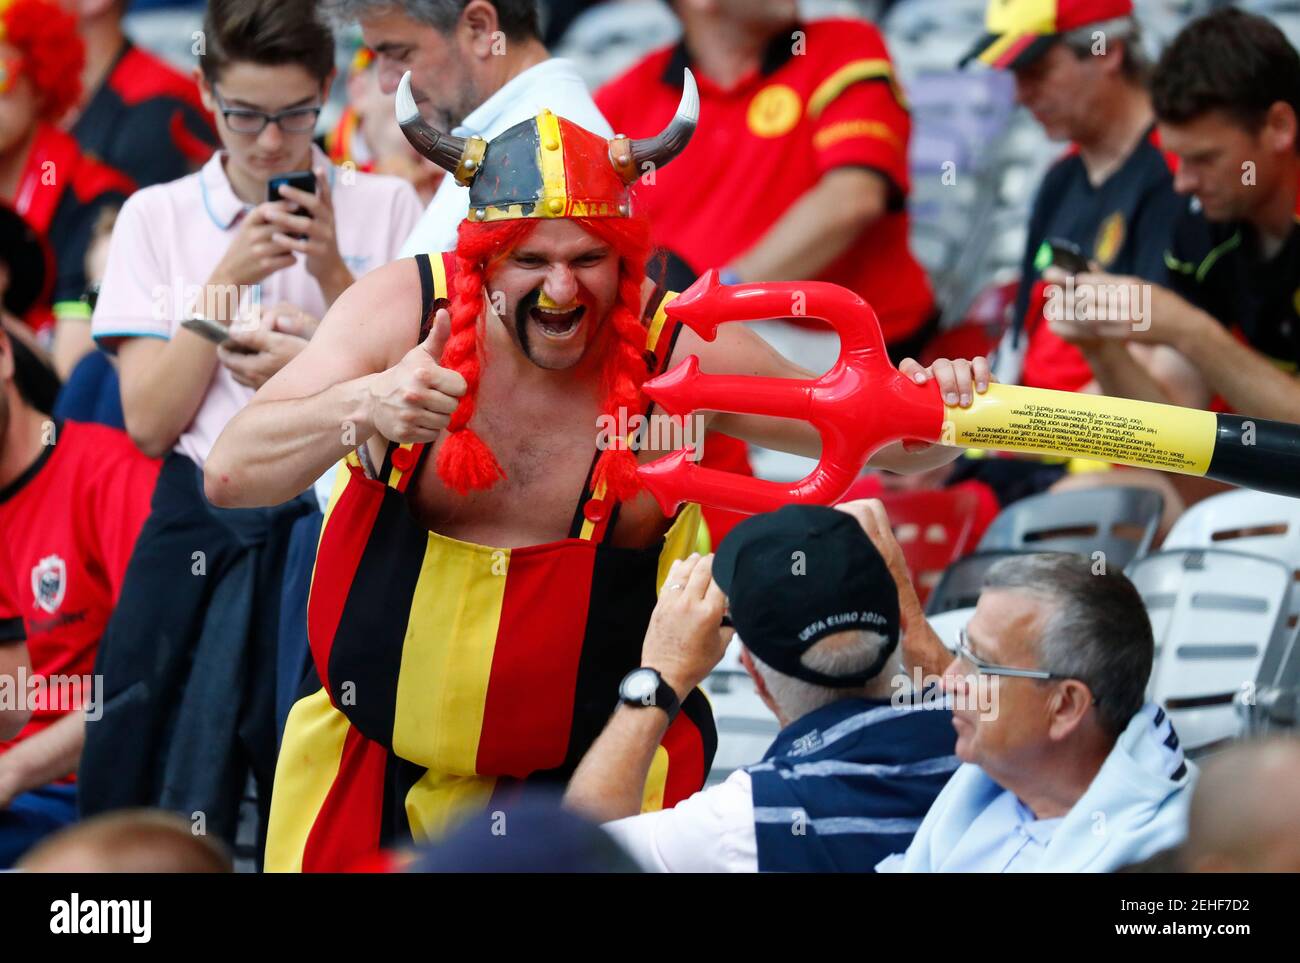 Football Soccer - Hungary v Belgium - EURO 2016 - Round of 16 - Stadium de Toulouse, Toulouse, France - 26/6/16  Belgium fan in fancy dress before the game  REUTERS/Michael Dalder  Livepic Stock Photo